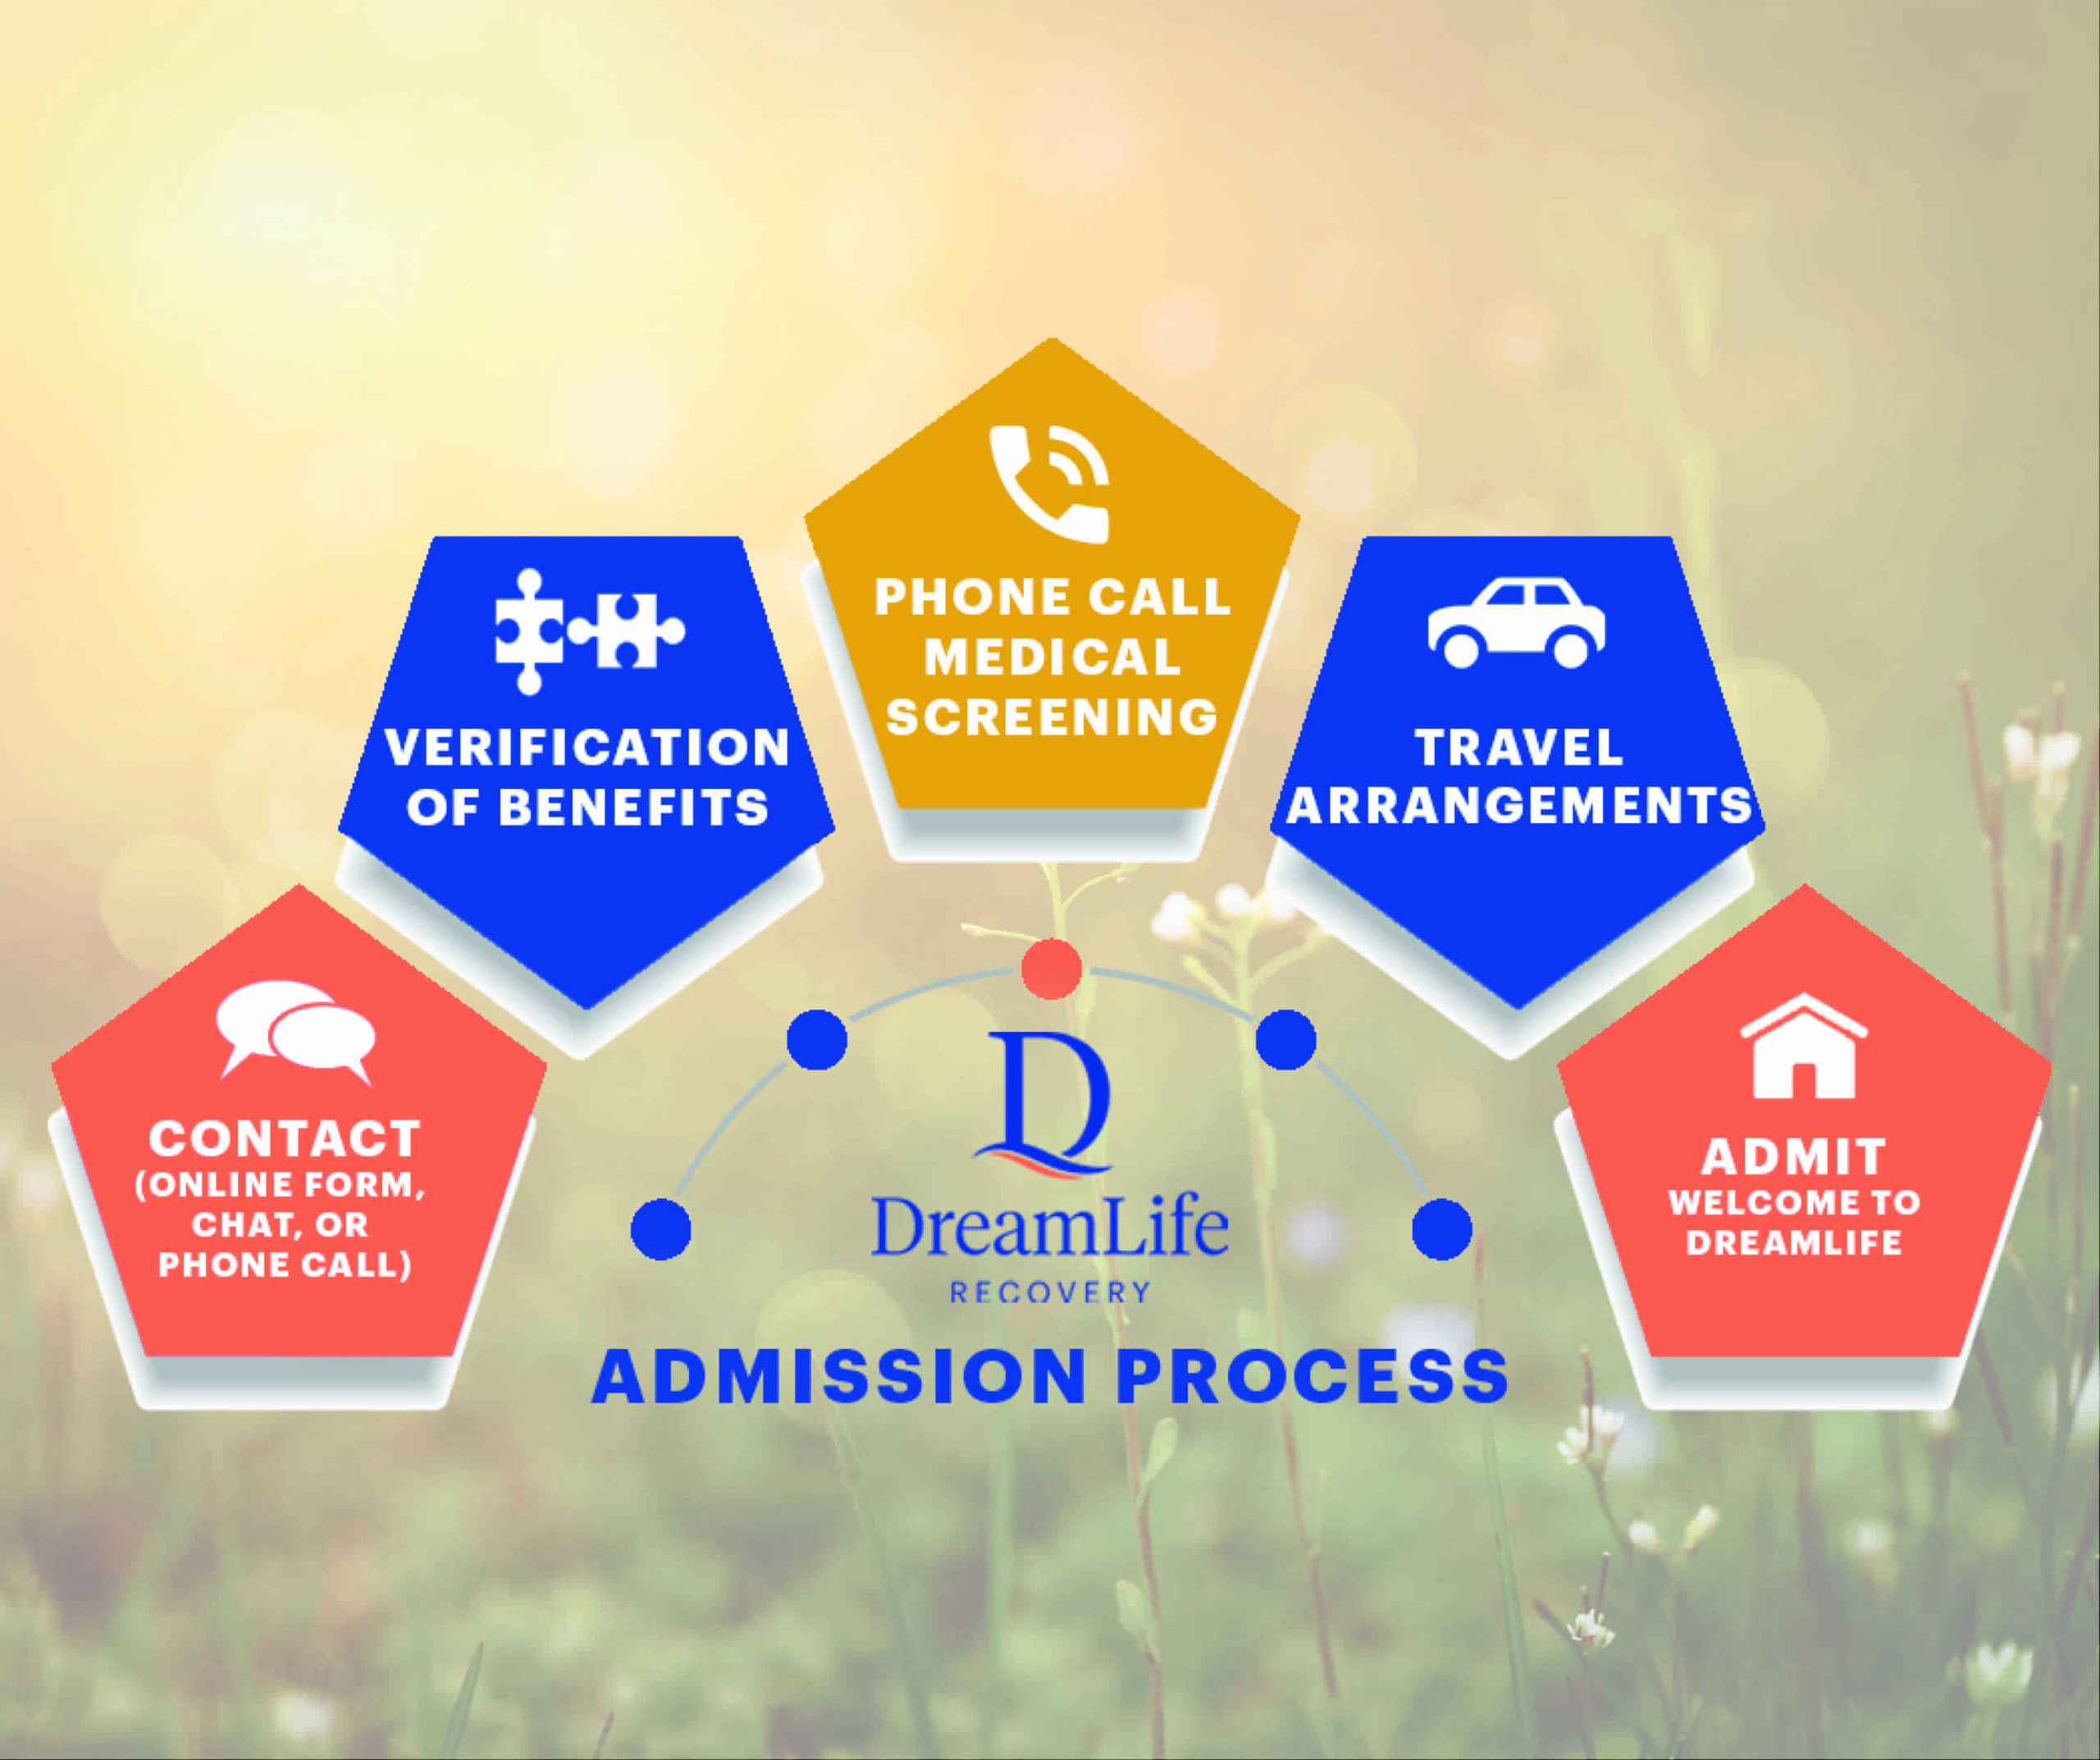 admissions graphic for dreamlife - steps